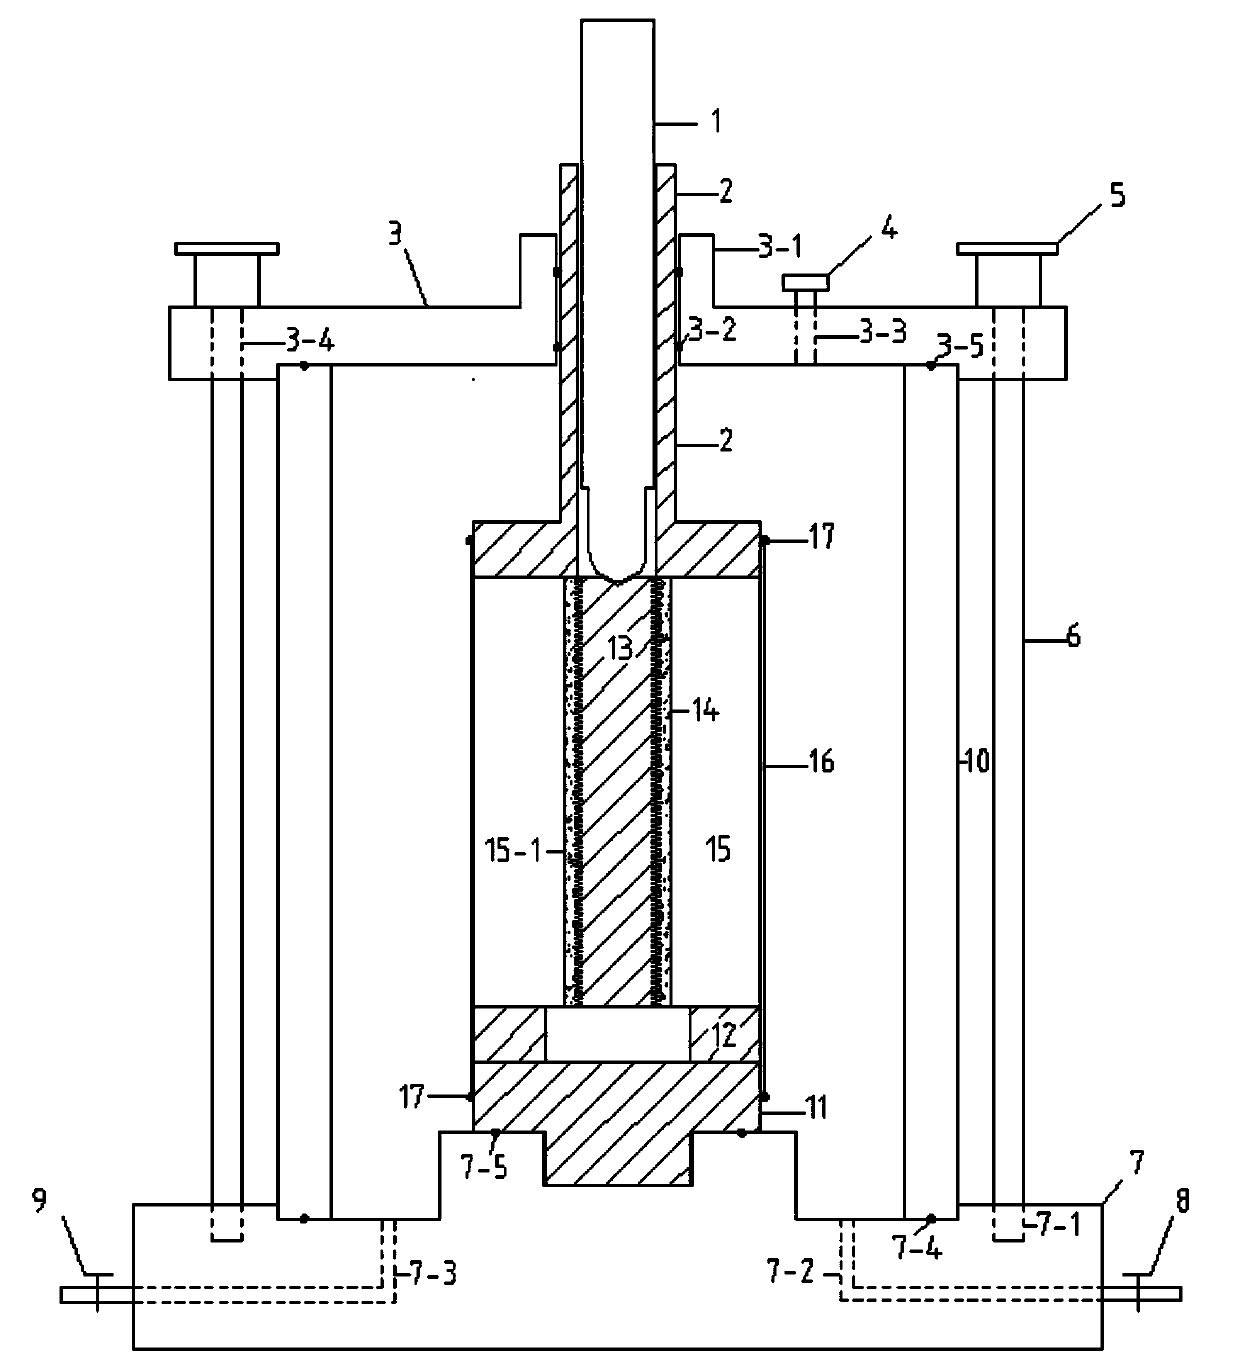 Rock side friction test device and method with controllable confining pressure